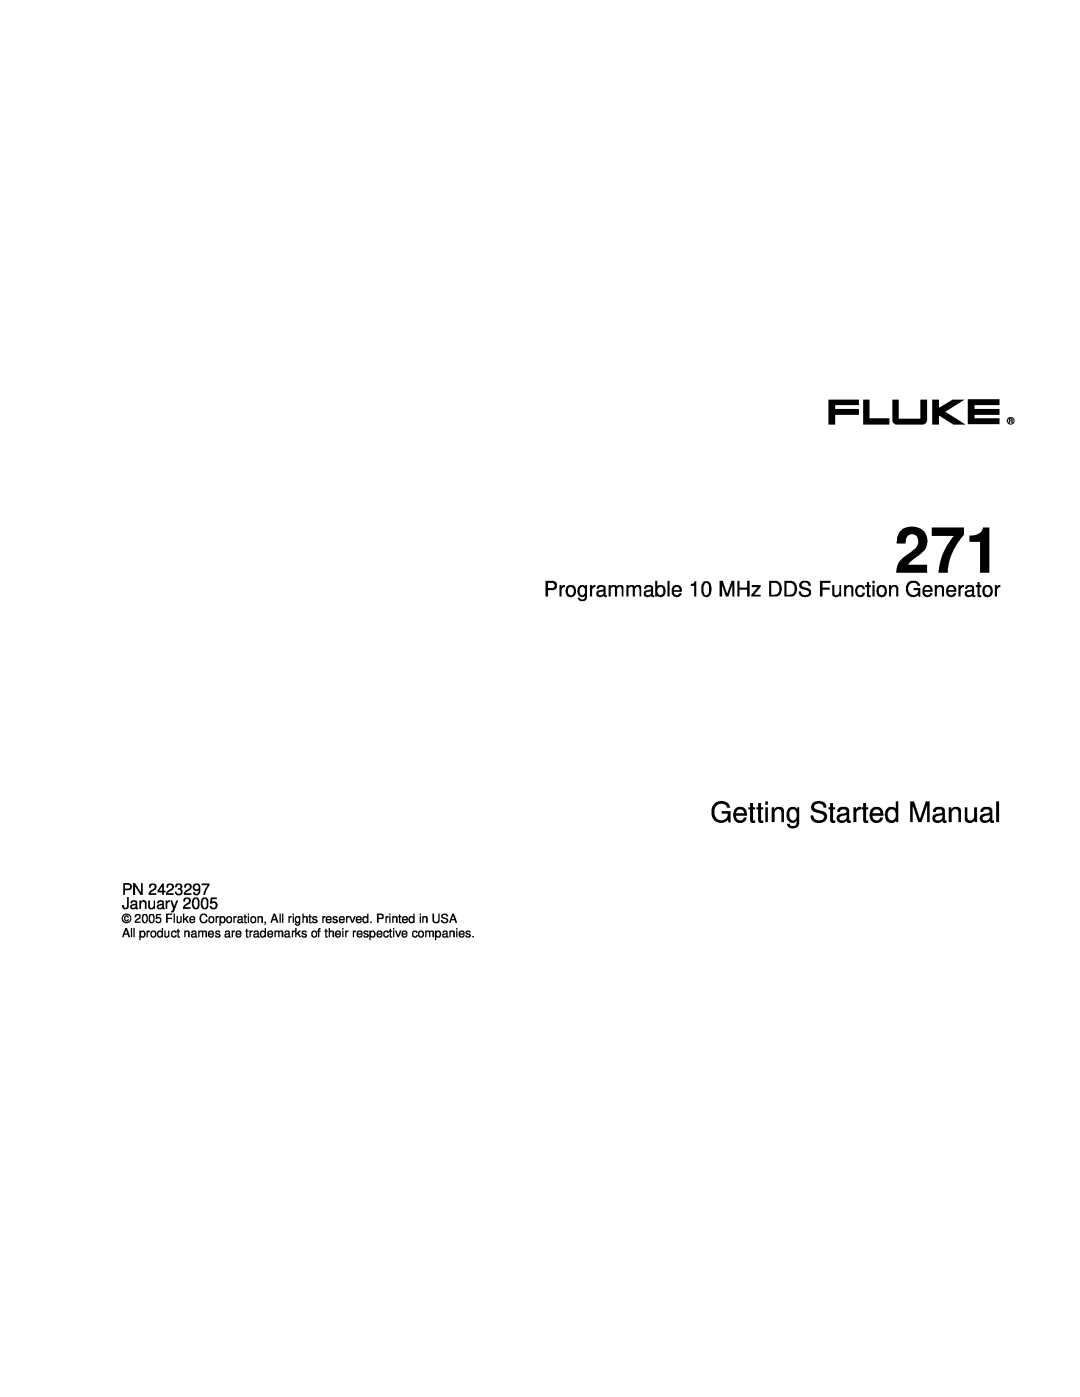 Fluke 271 manual Getting Started Manual, Programmable 10 MHz DDS Function Generator 